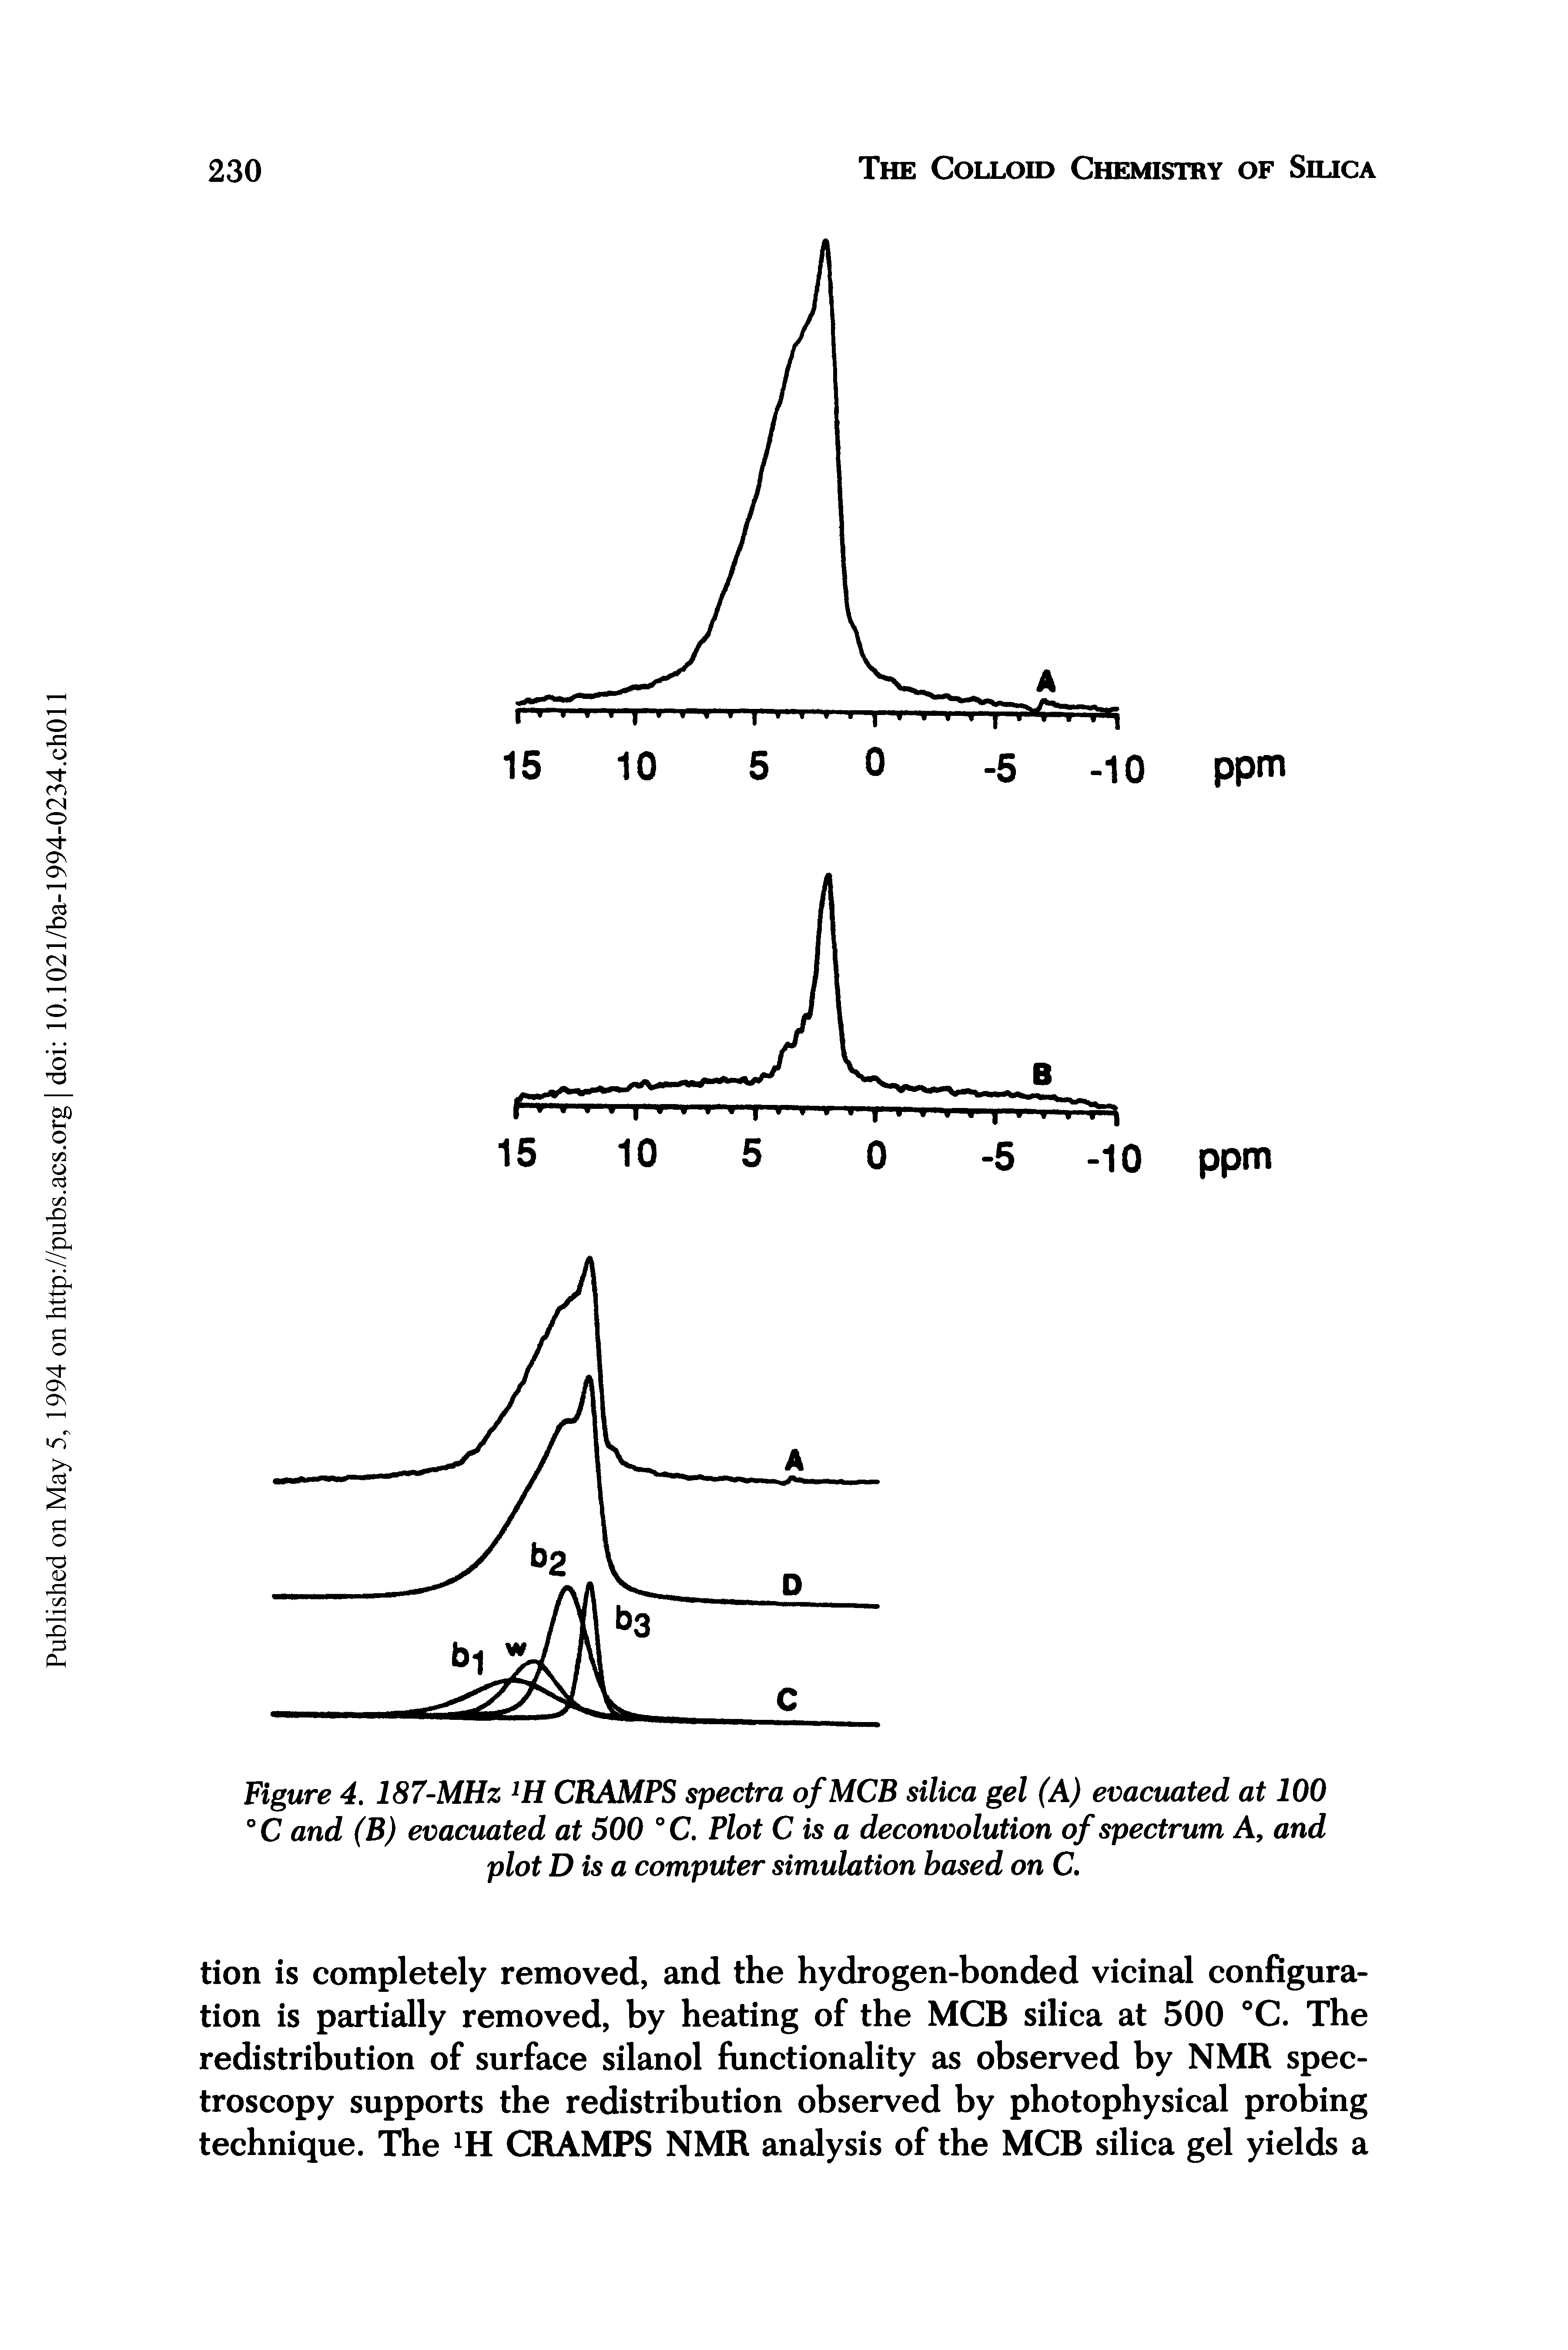 Figure 4. 187-MHz CRAMPS spectra ofMCB silica gel (A) evacuated at 100 °C and (B) evacuated at 500 °C. Plot C is a deconvolution of spectrum A, and plot D is a computer simulation based on C.